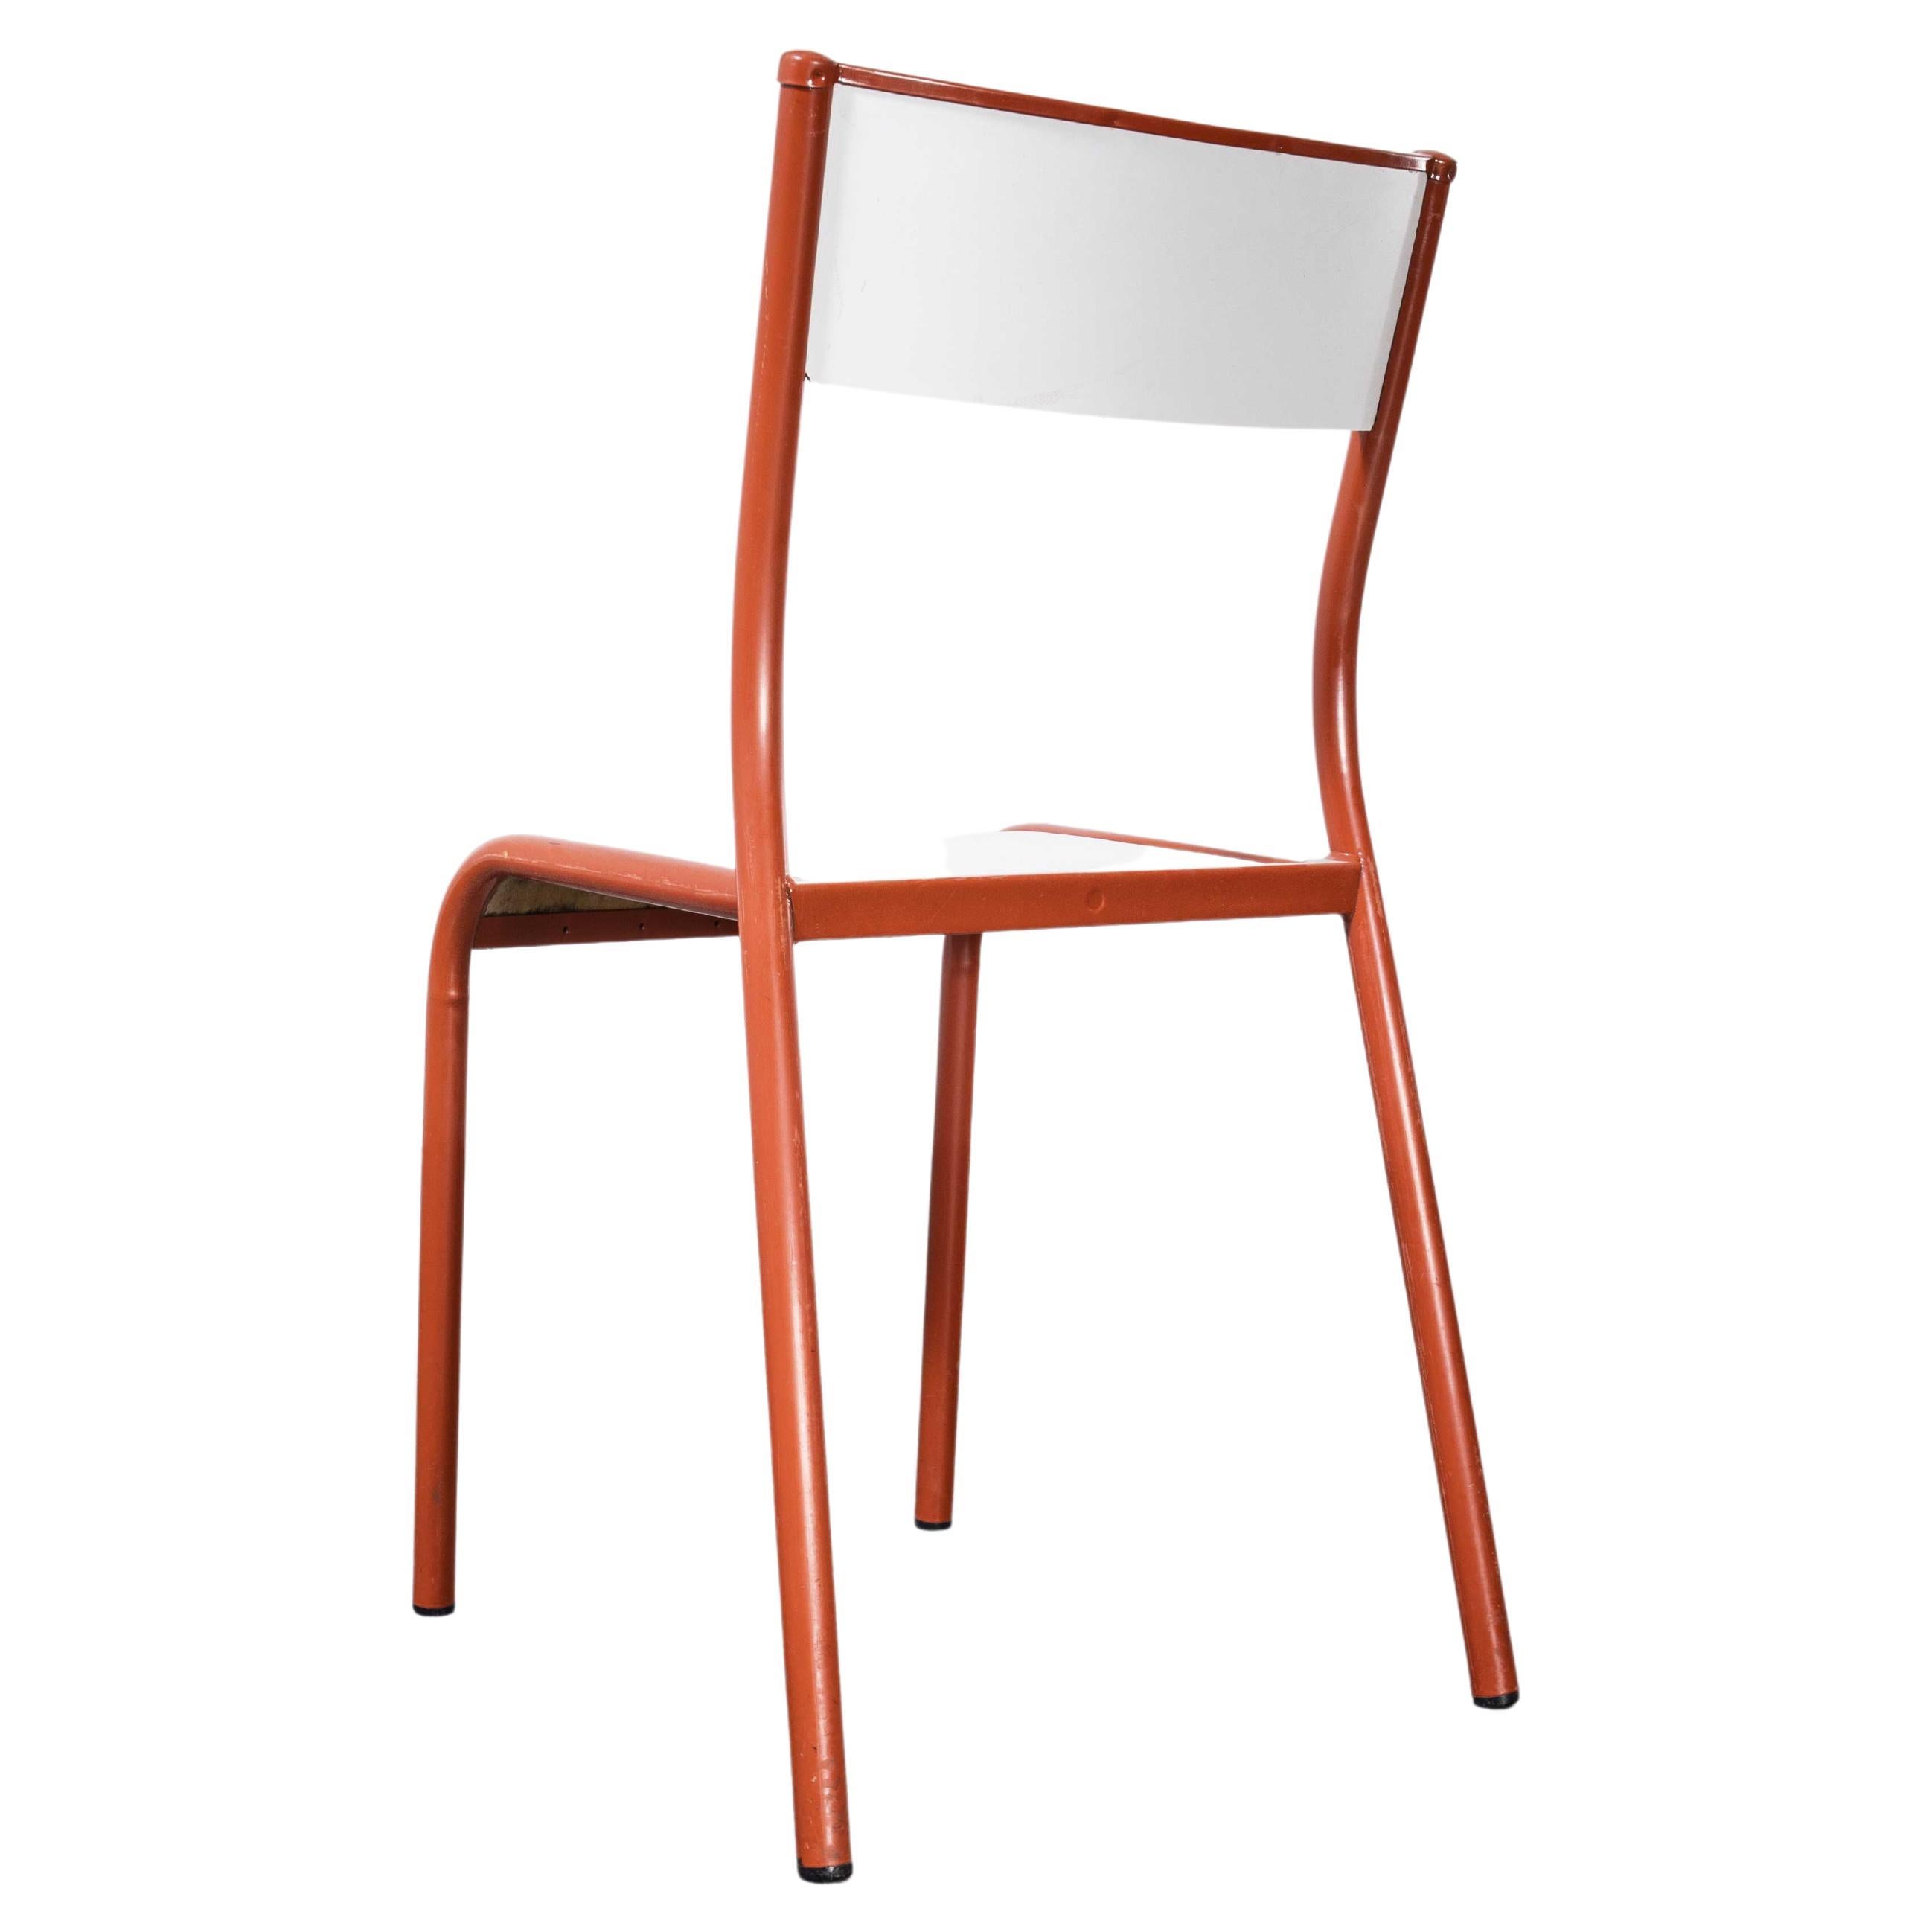 1970’s Red Mullca Stacking Dining Chair – Last Few Remaining    
   
1970’s Red Mullca Stacking Dining Chair – Last Few Remaining. One of our most favourite chairs, in 1947 Robert Muller and Gaston Cavaillon created the company that went on to